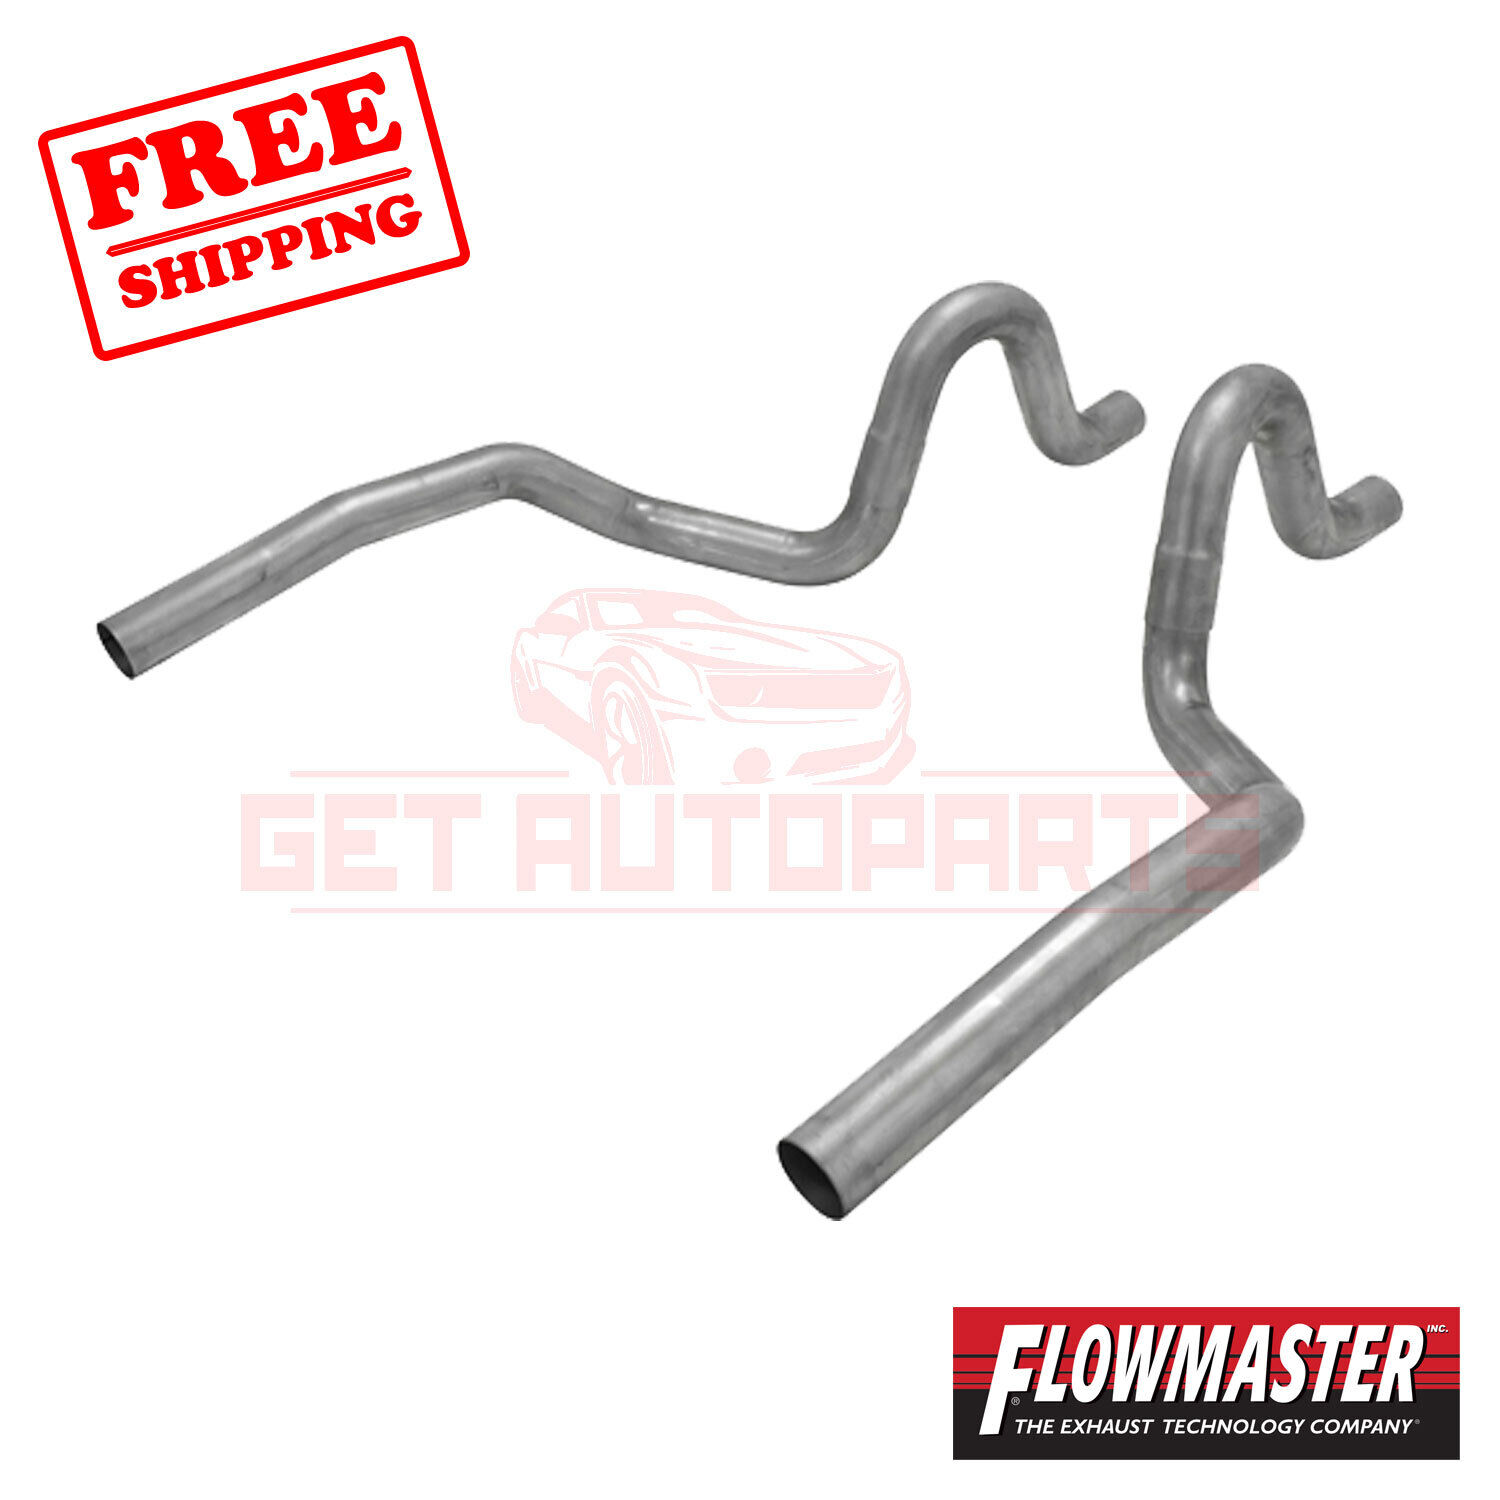 FlowMaster Exhaust Tail Pipe for Chevrolet El Camino 1968-1972